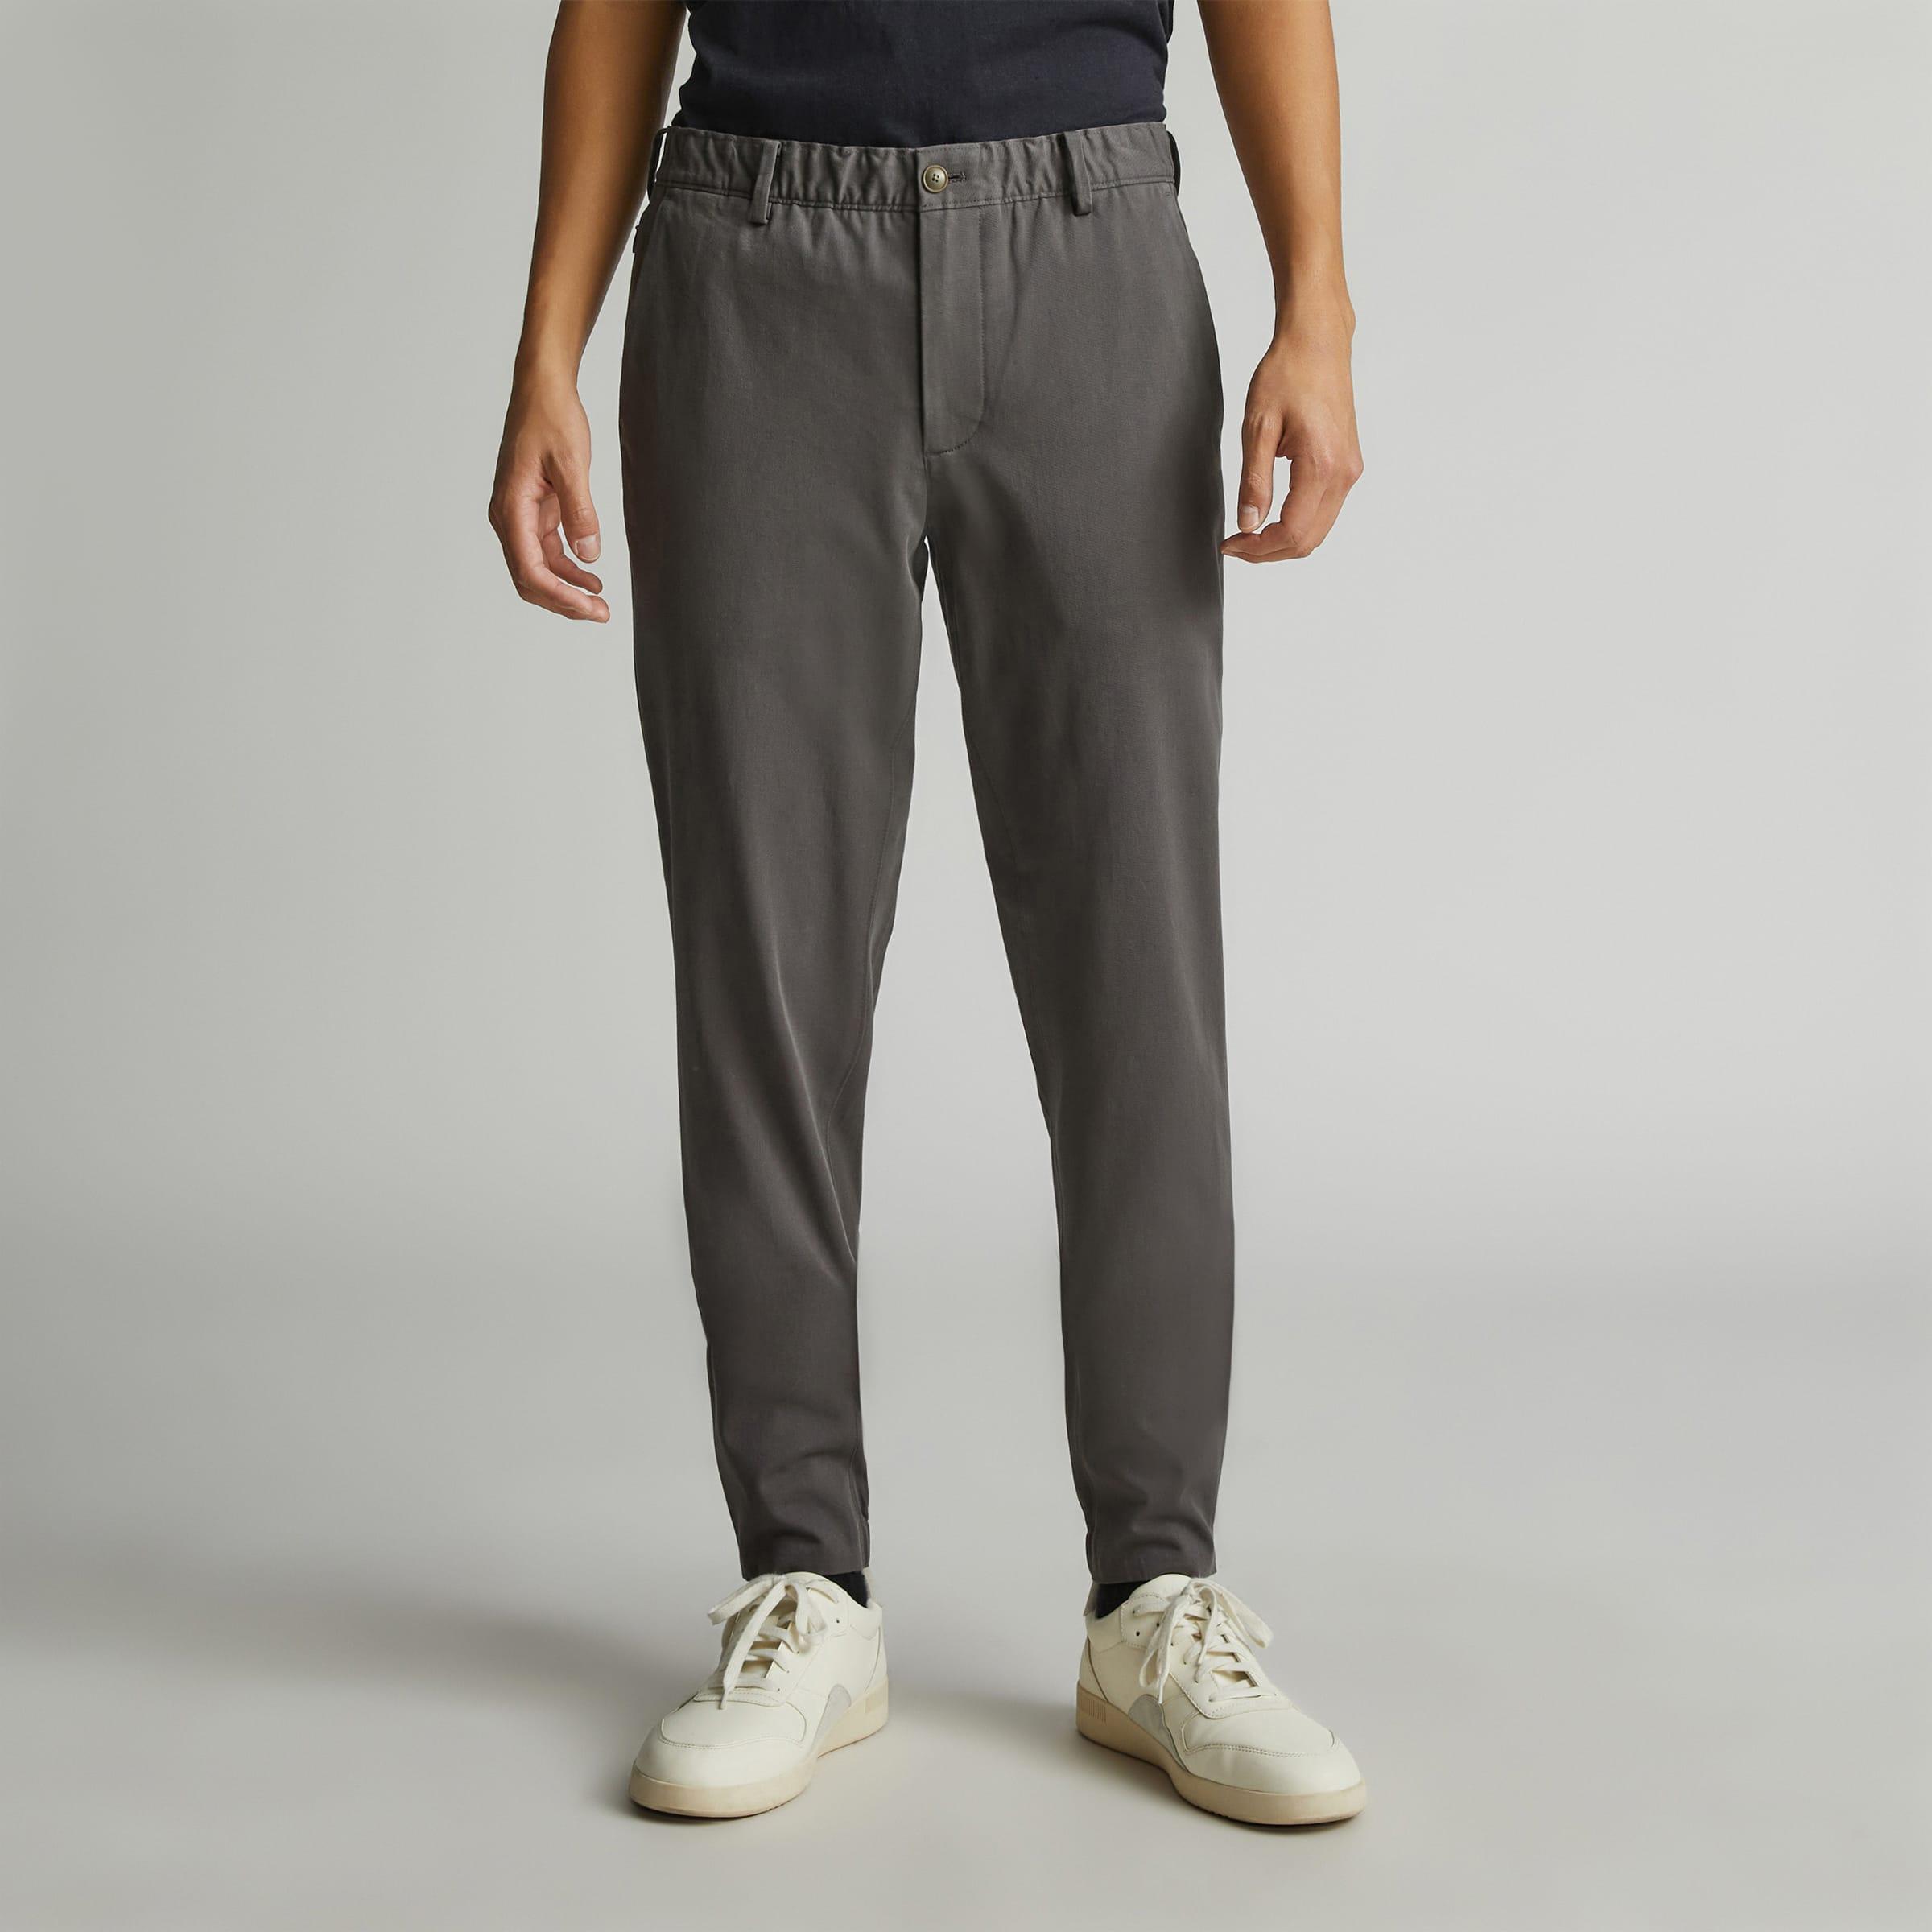 Mens Performance Traveler Chino by Everlane in Slate Grey, Size 35x32 Product Image